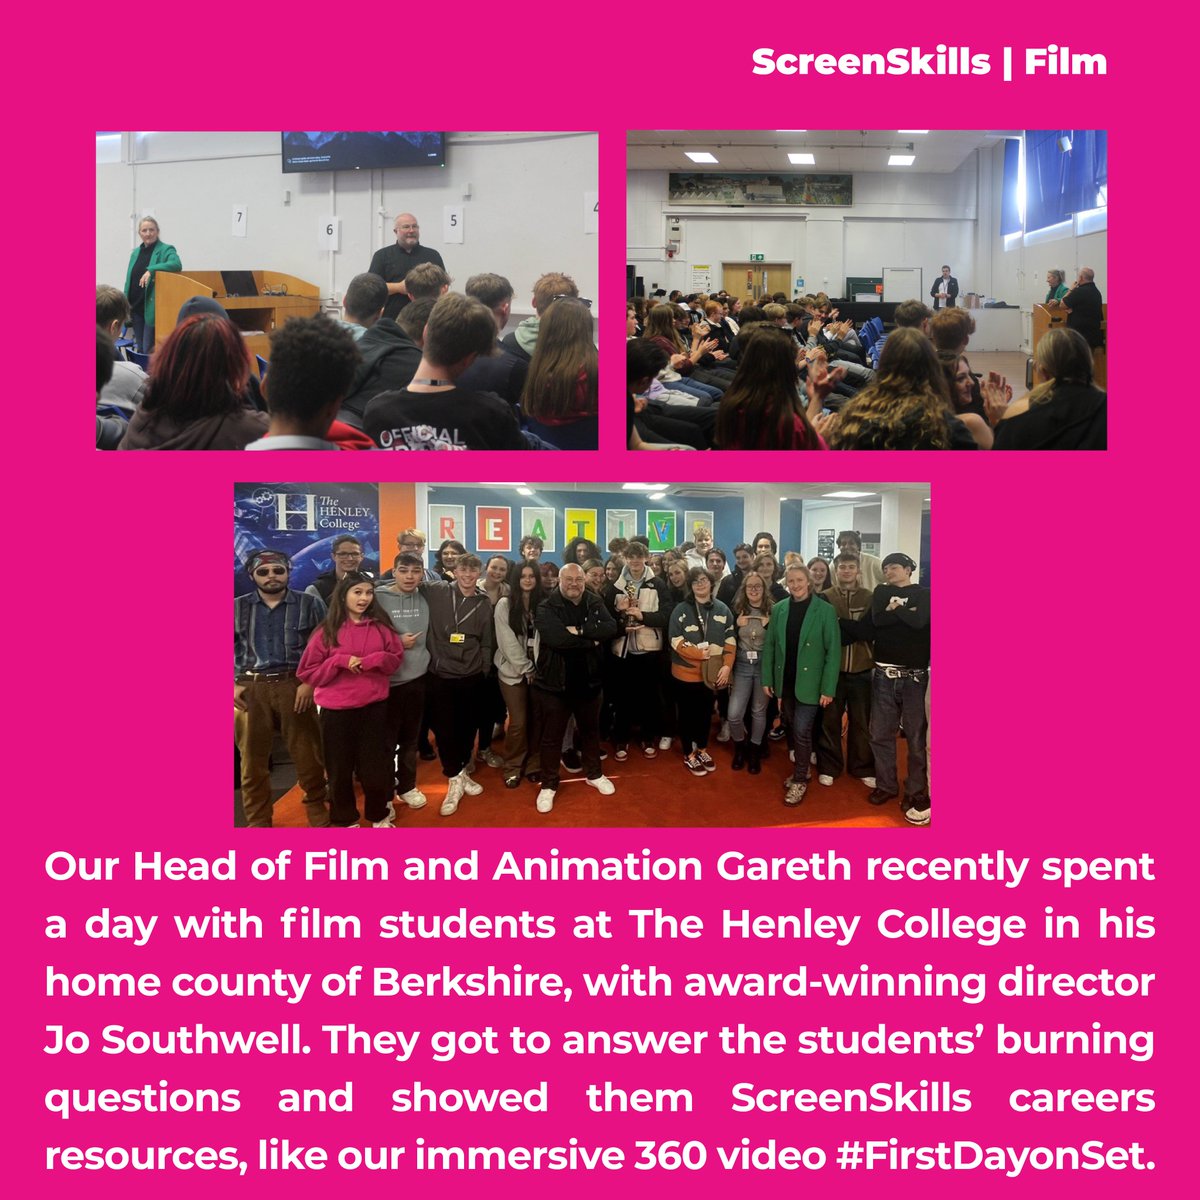 Our Head of Film and Animation @Bedlam_Gareth  recently spent a day with film students at @HenleyCol in his home county of #Berkshire, answering their burning questions and showing them some of our careers resources, like our immersive 360 #FirstDayonSet: bit.ly/3ME4rOg